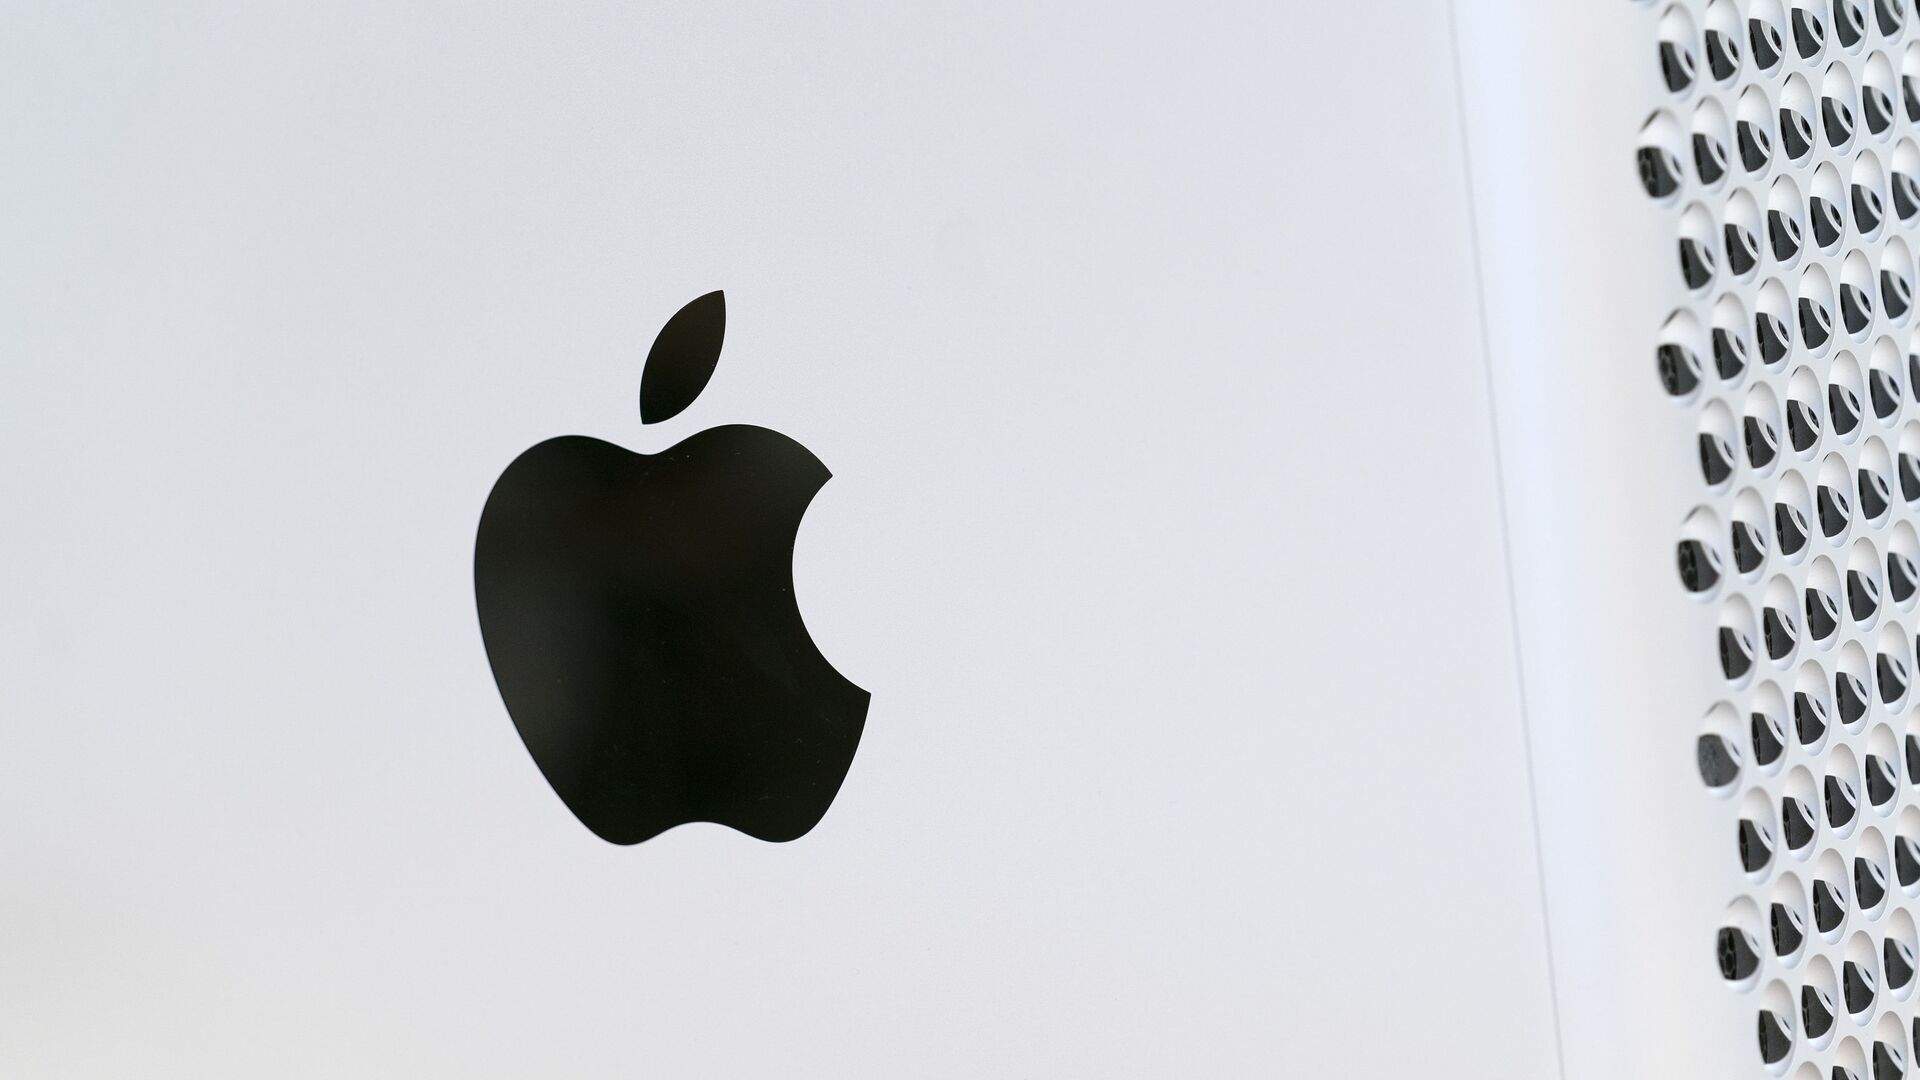 This May 21, 2021 photo shows the Apple logo displayed on a Mac Pro desktop computer in New York.  Apple is planning to scan U.S. iPhones for images of child abuse, drawing applause from child protection groups but raising concern among security researchers that the system could be misused by governments looking to surveil their citizens. - Sputnik International, 1920, 24.03.2022